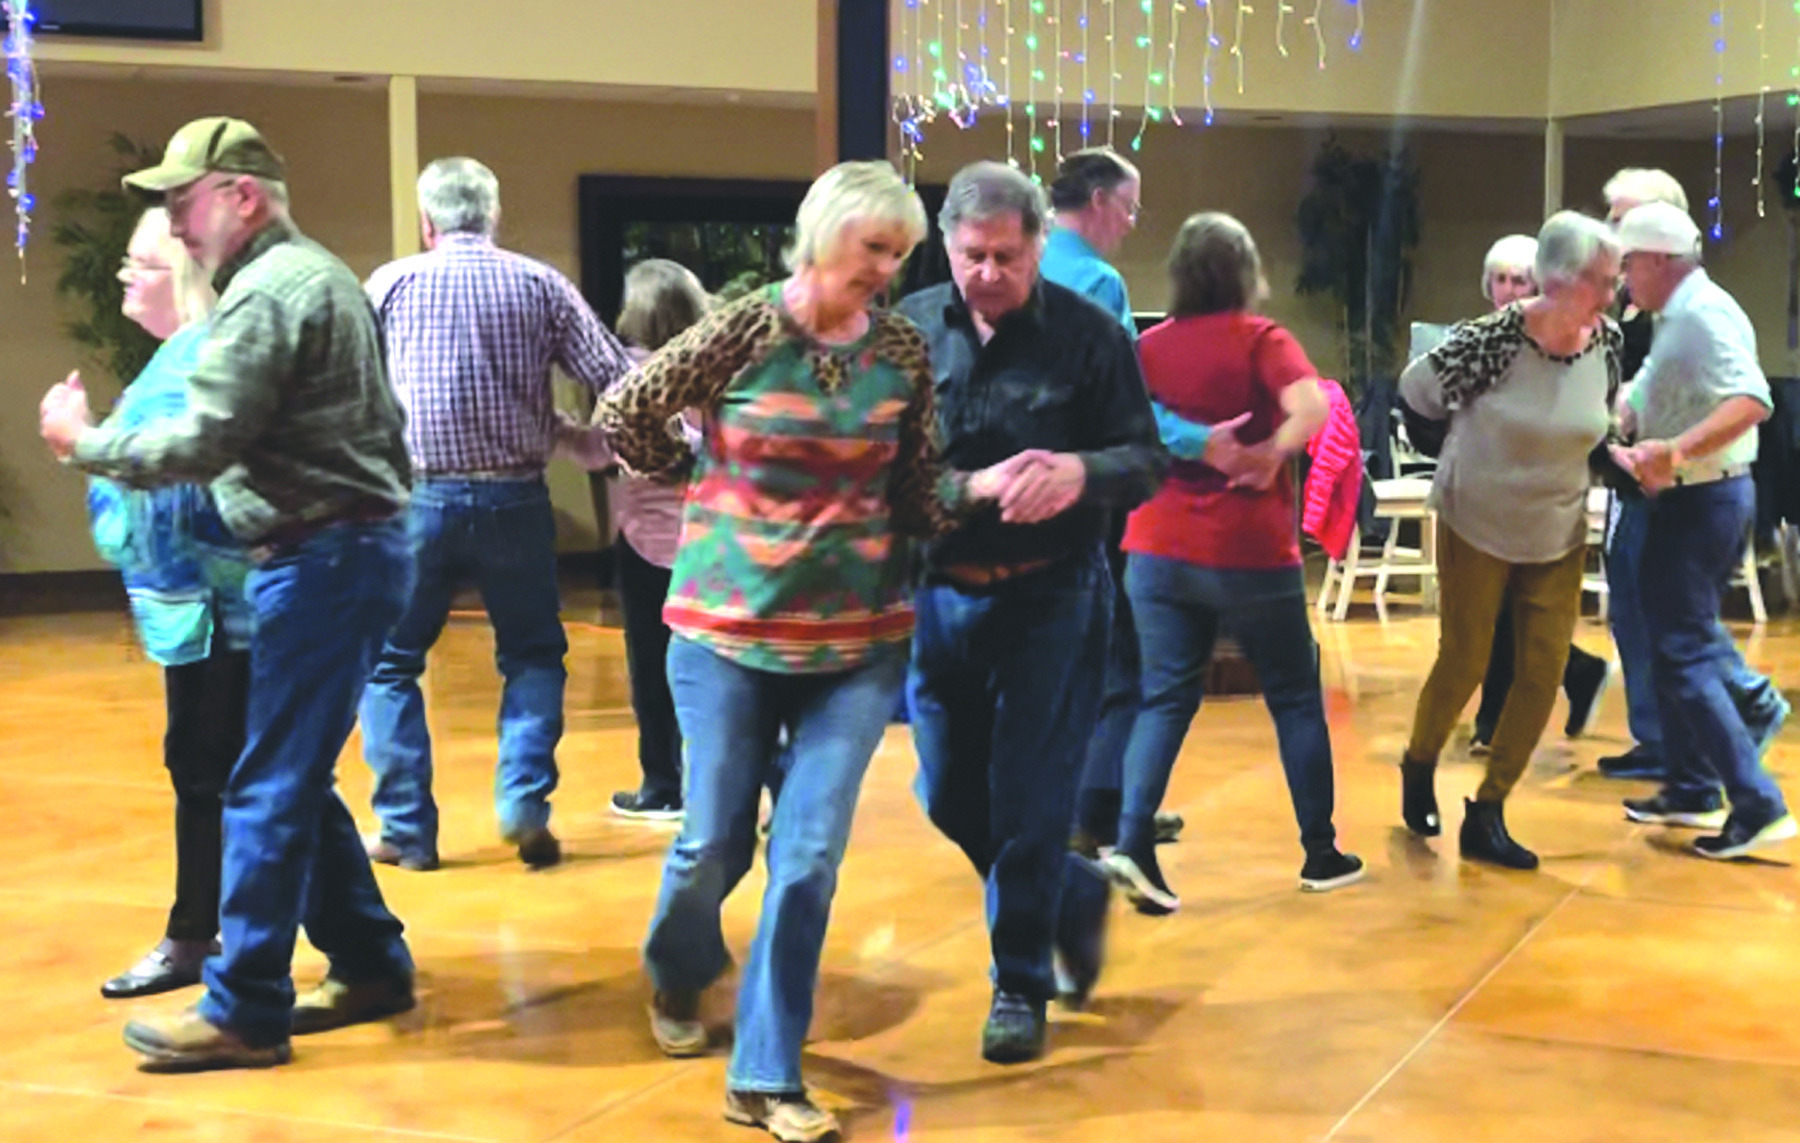 ◄ The Hi-Steppers Square Dance Club performs a dance with a variety of calls and movements in the Life Fellowship Church. Classes for beginners will begin January 10. Kimberly Lippencott/WDN